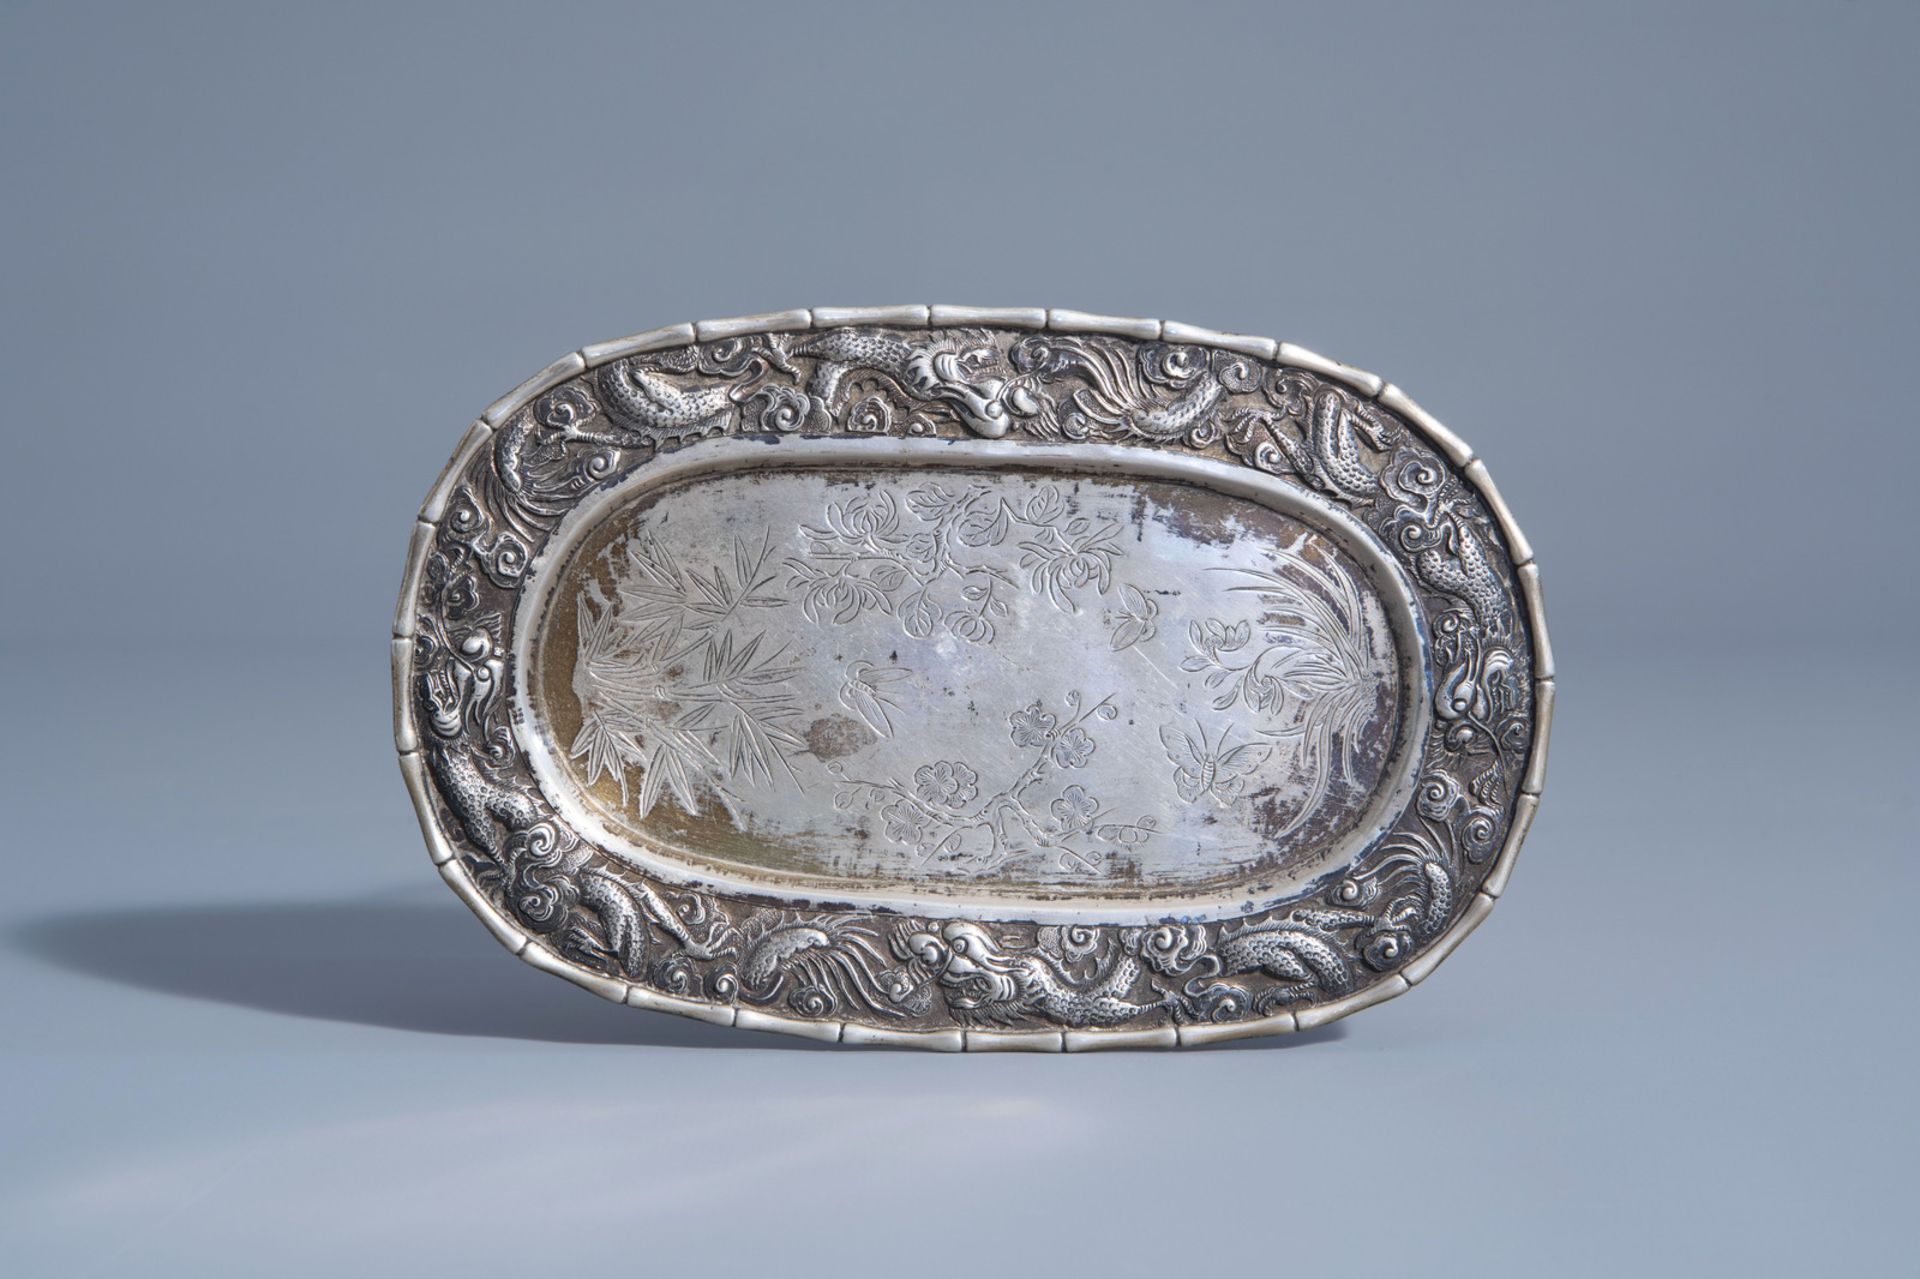 A Chinese export silver plate with dragons and floral design, 'Luen Wo' mark, about 1900